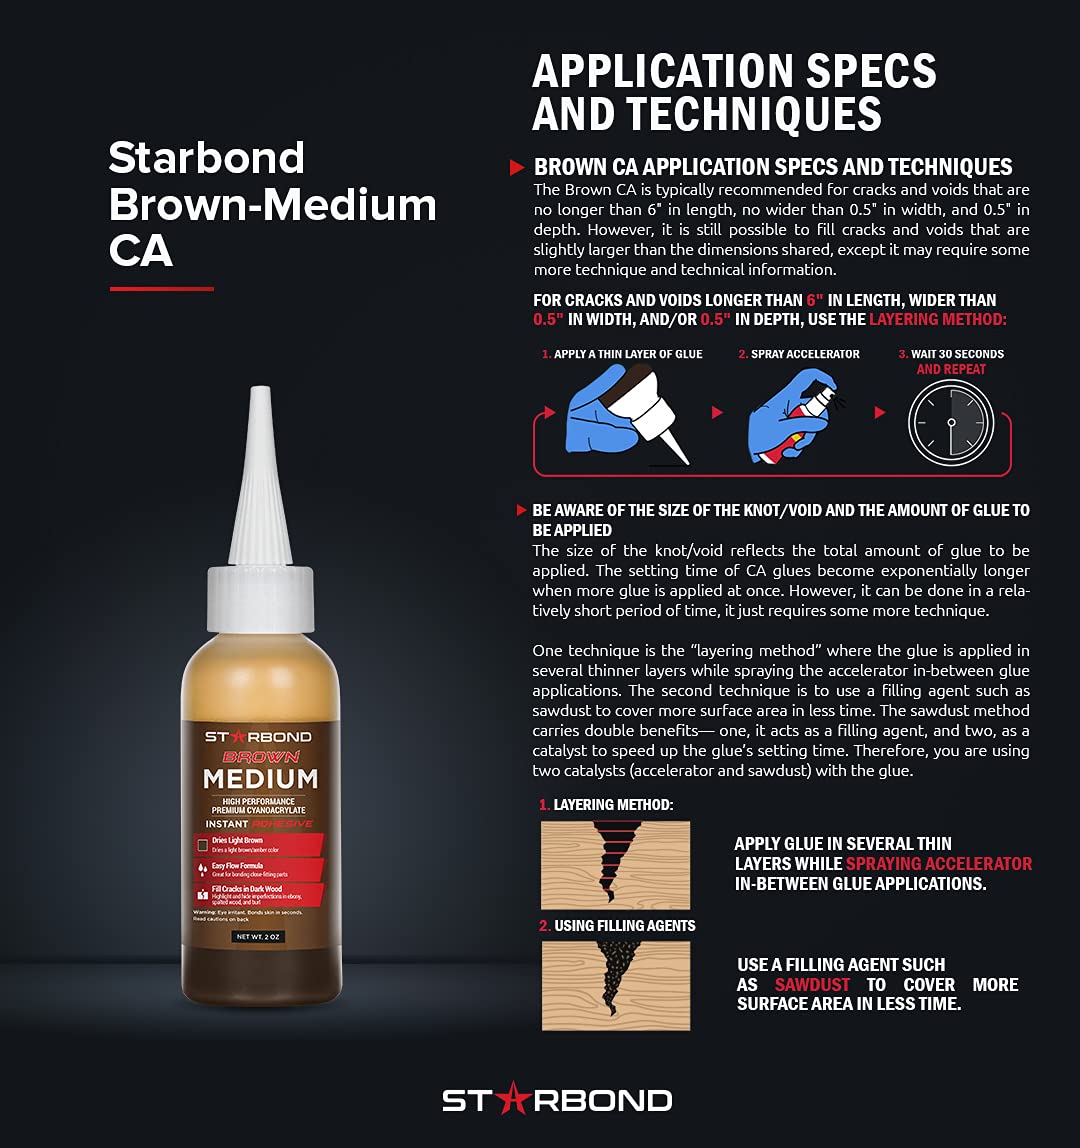 Premium Grade Cyanoacrylate (CA) Super Glue by STARBOND - 16 OZ Complete Refill KIT (453-gram) - "Light Brown" Medium Crack Filler 150 CPS Viscosity Adhesive for Woodworking, Woodturning, Carpentry